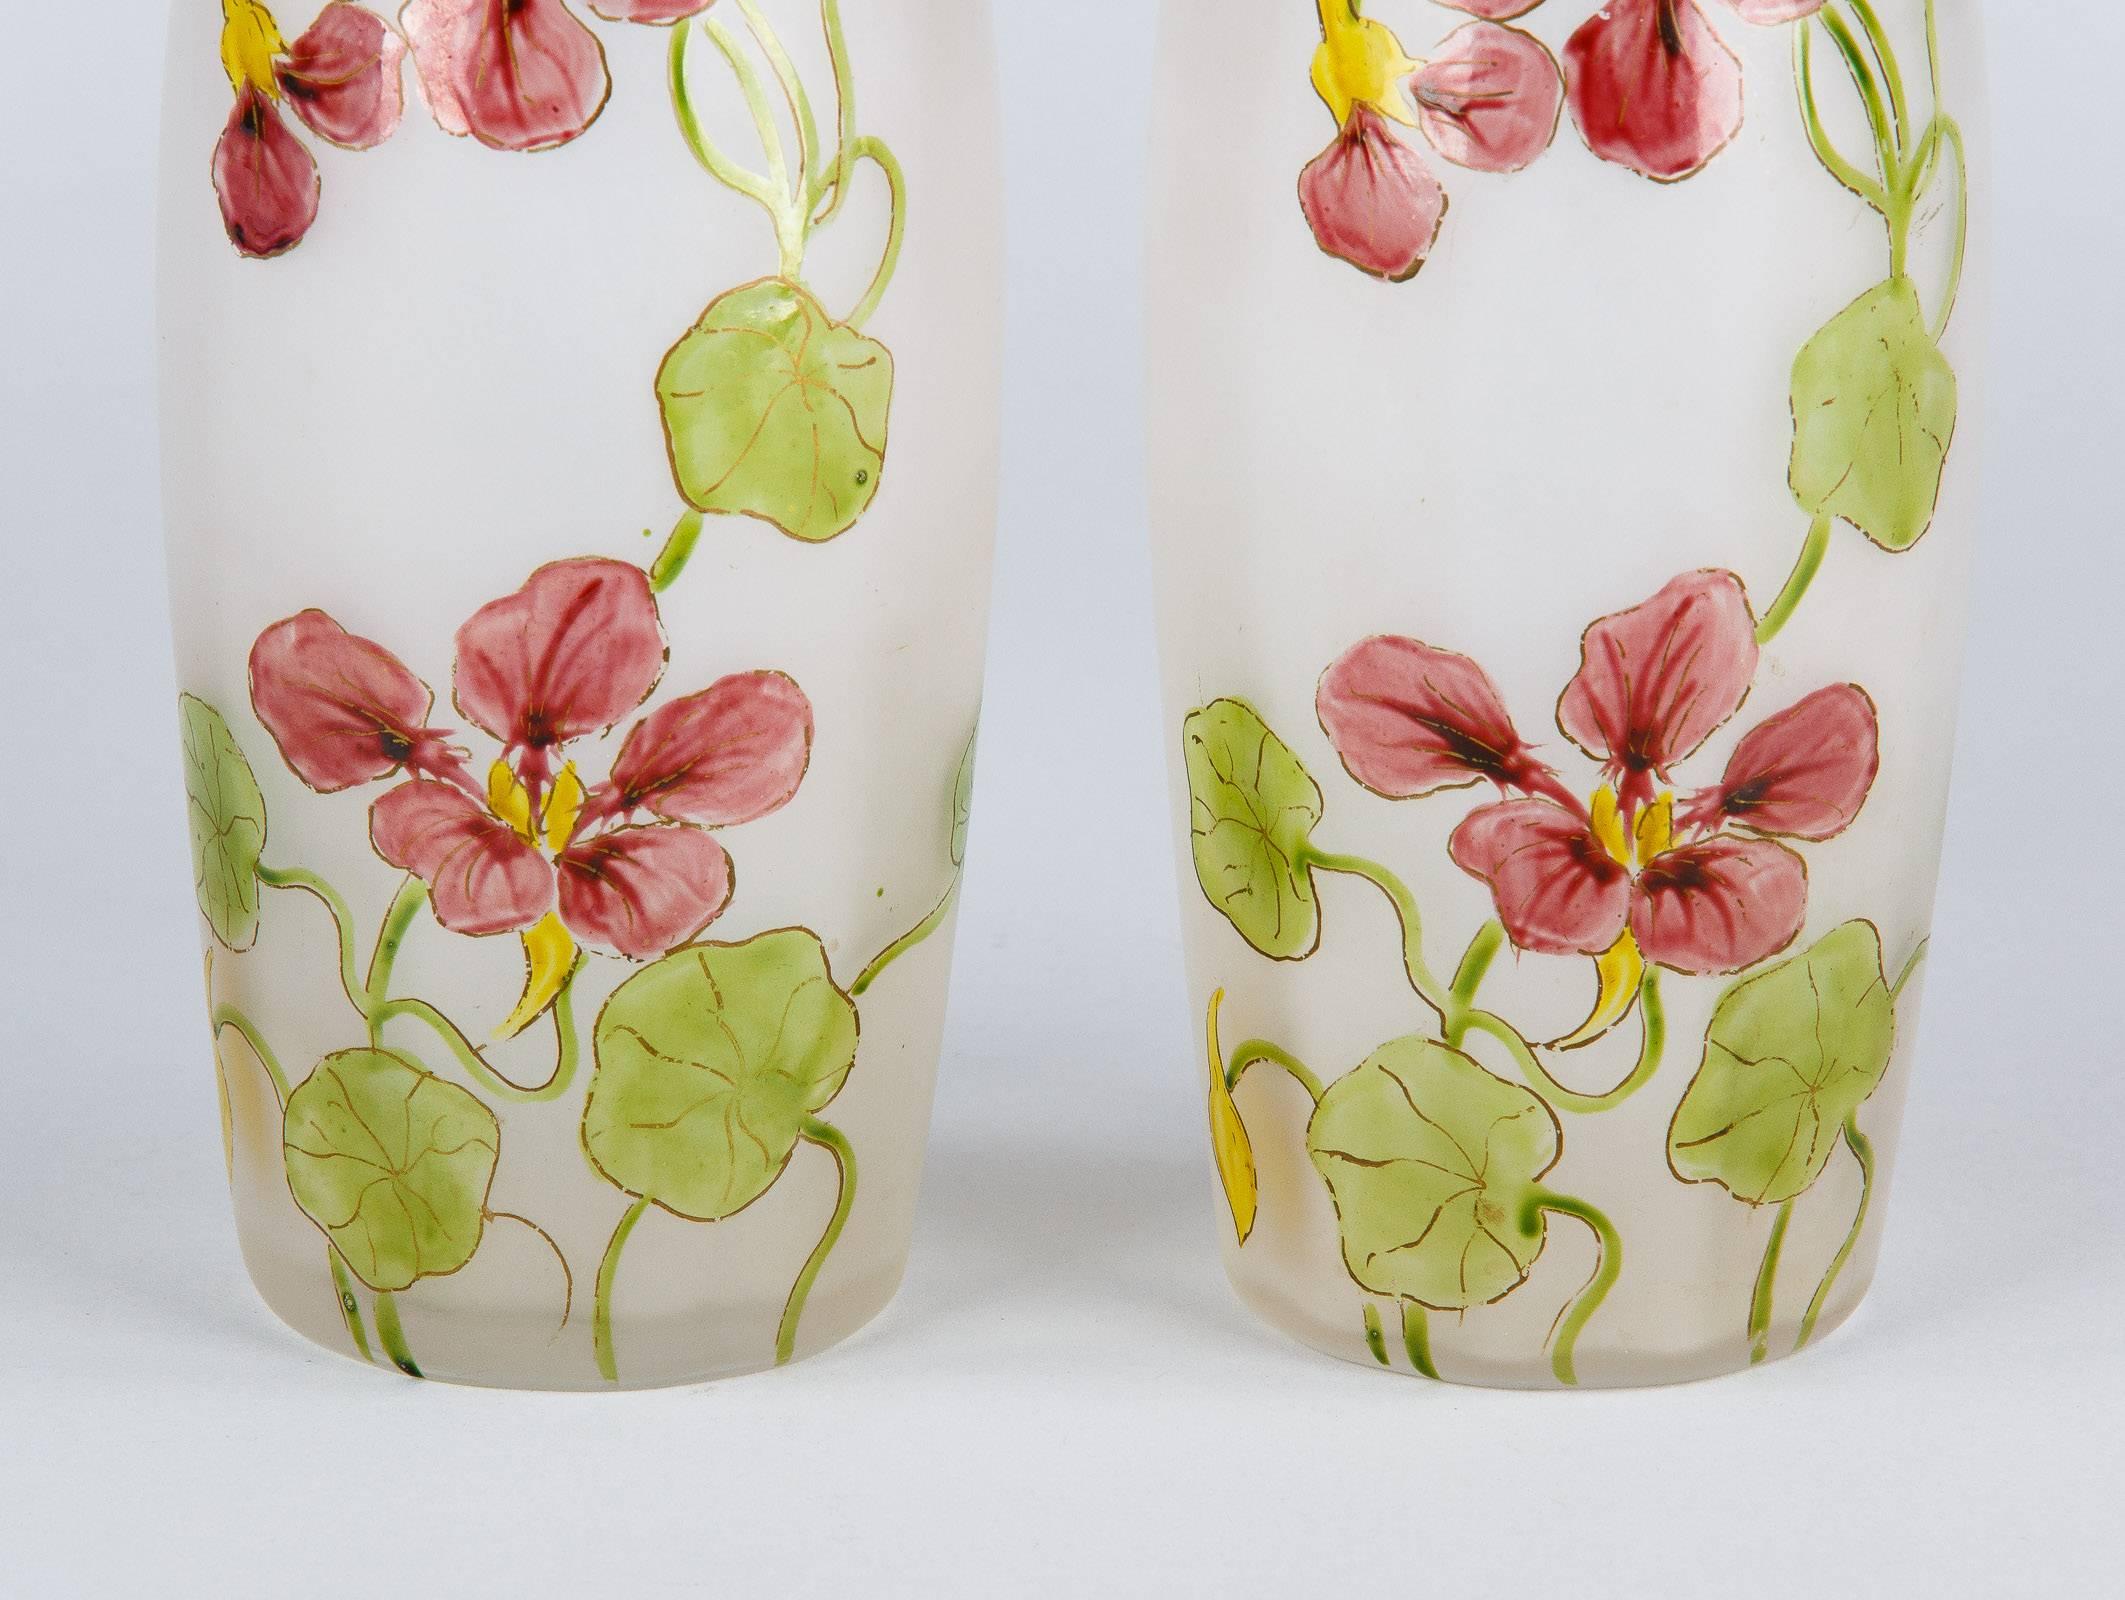 20th Century Pair of Hand-Painted French Art Nouveau Glass Vases, 1900s